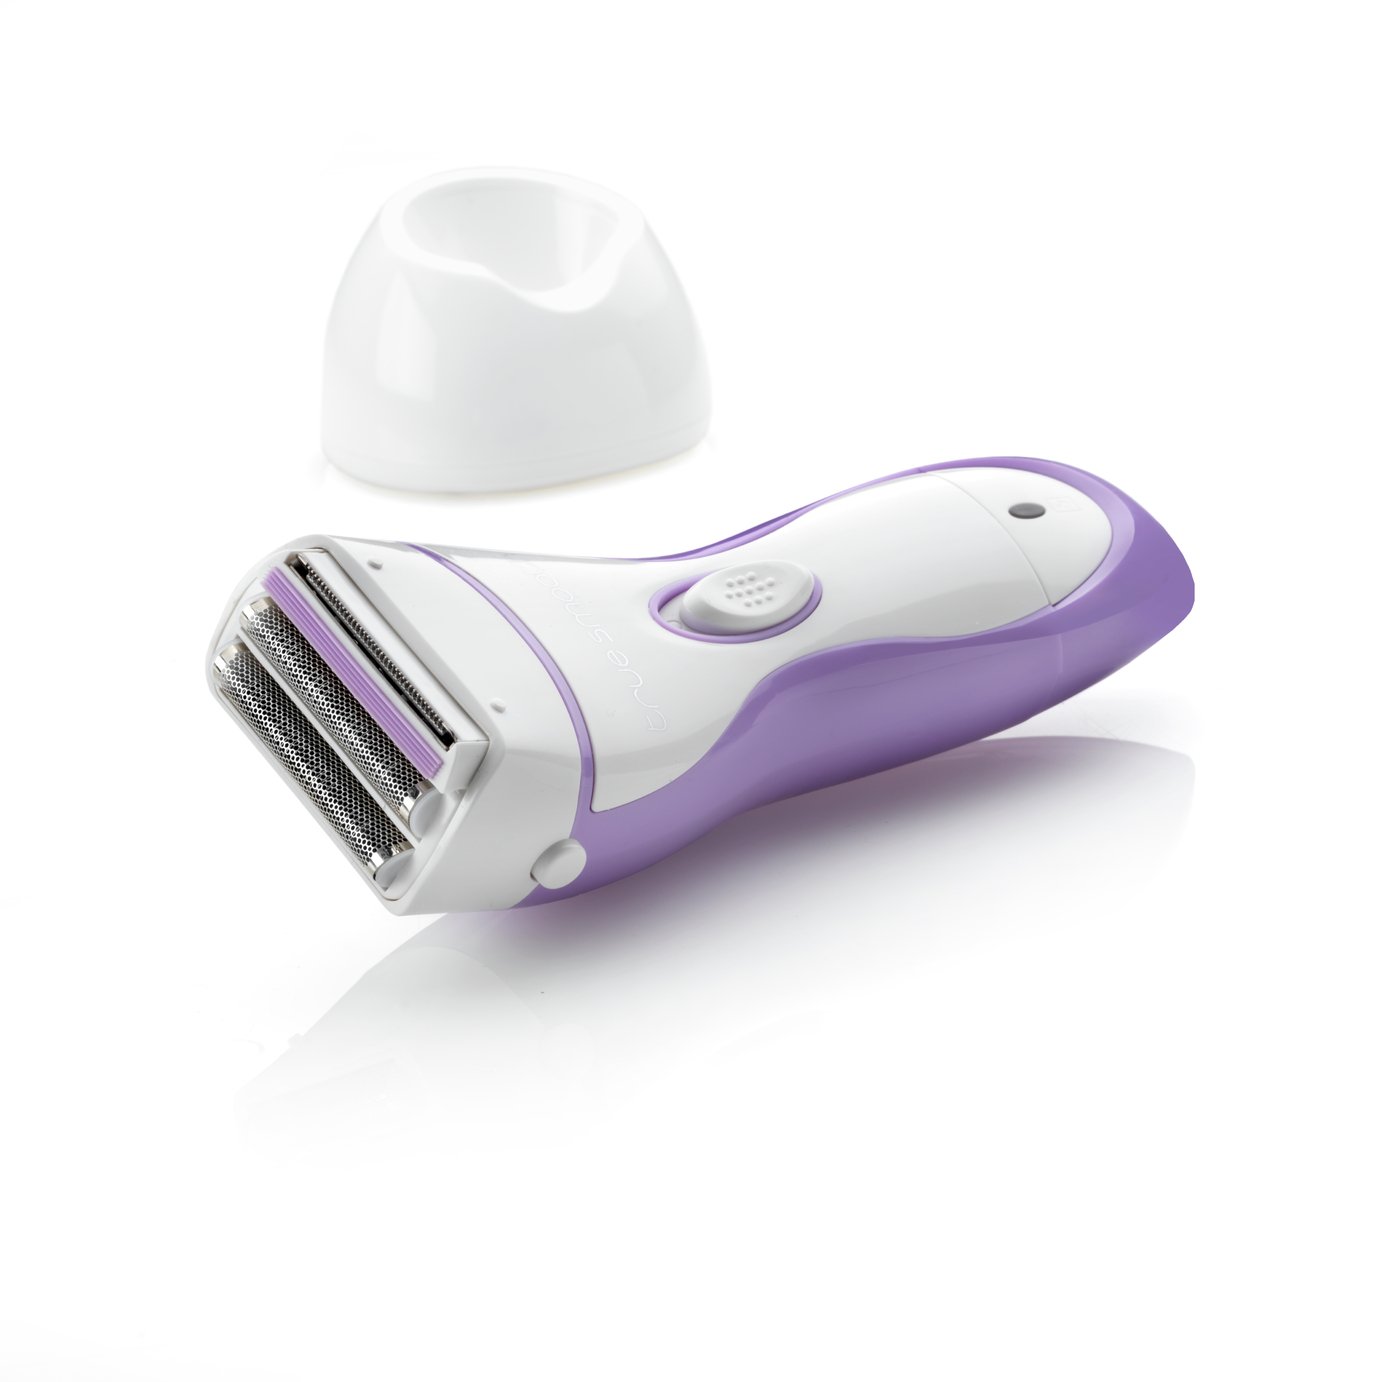 babyliss lady trimmer